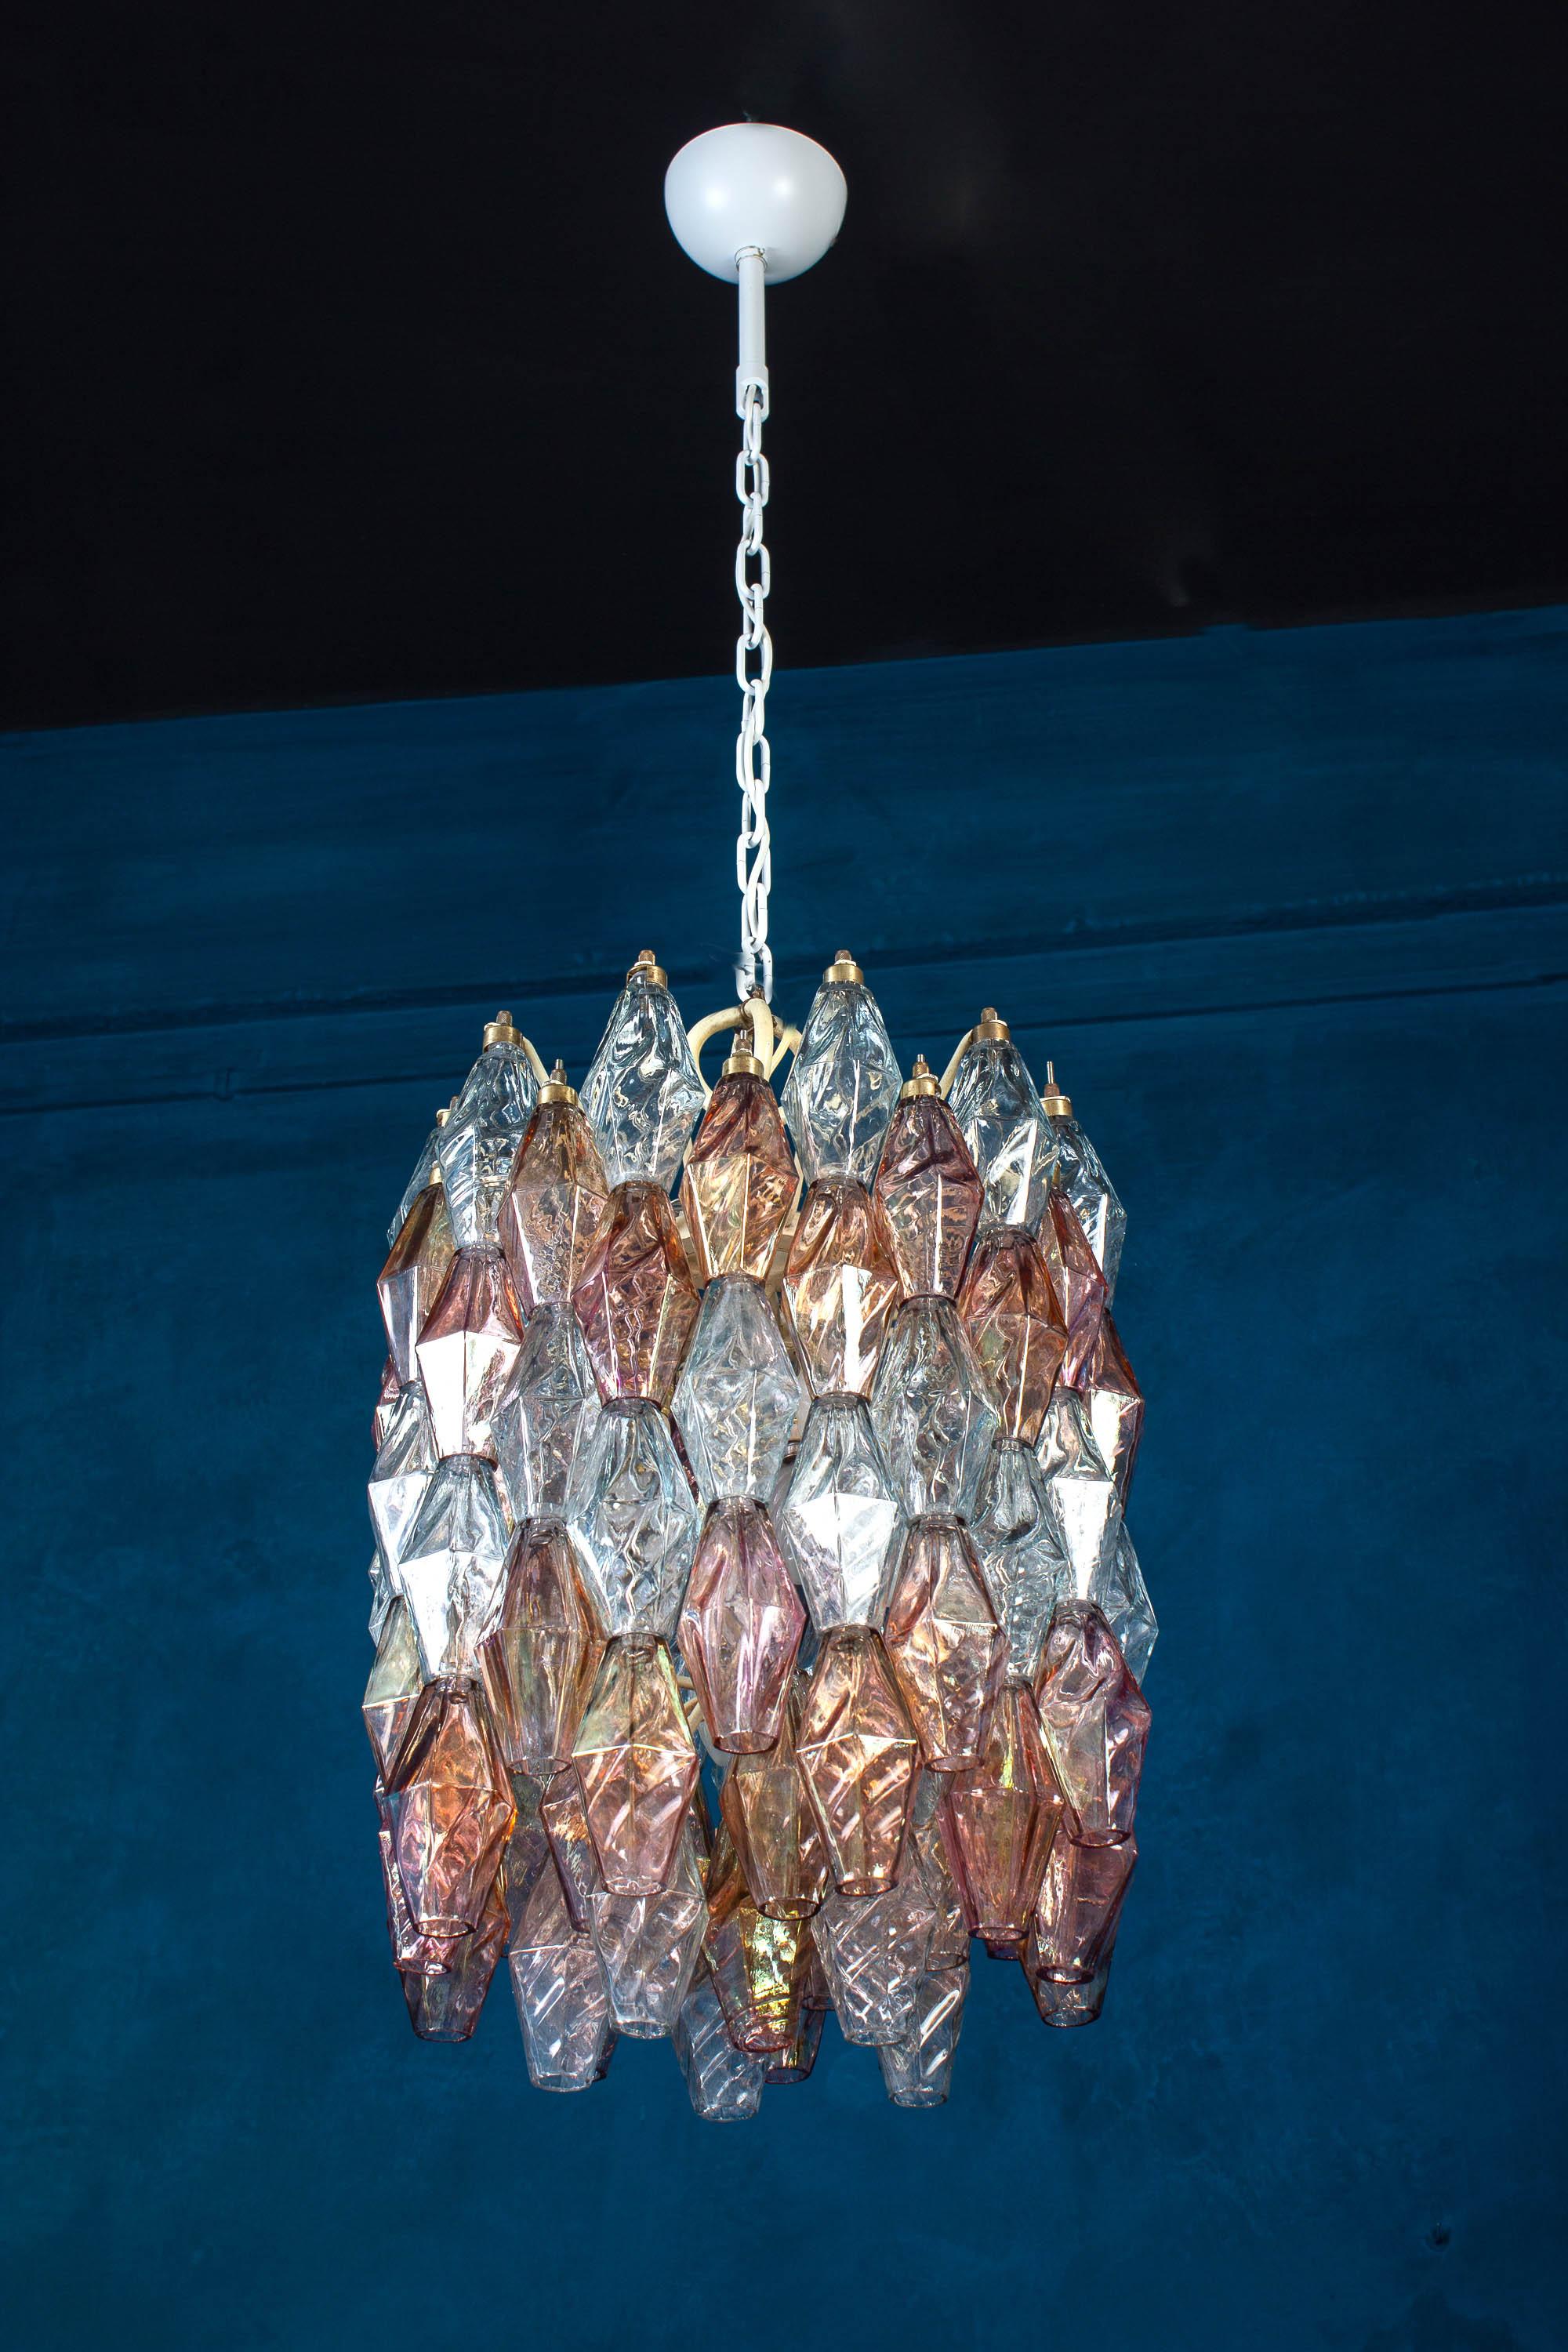 Fabulous pair of poliedri chandeliers, rare combination of iridescent pink and light blue color Murano glass.
Available four pairs and also 6 pair of sconces.
Provenance form a historic Roman Palace of the period.
Ivory painted frame in very good